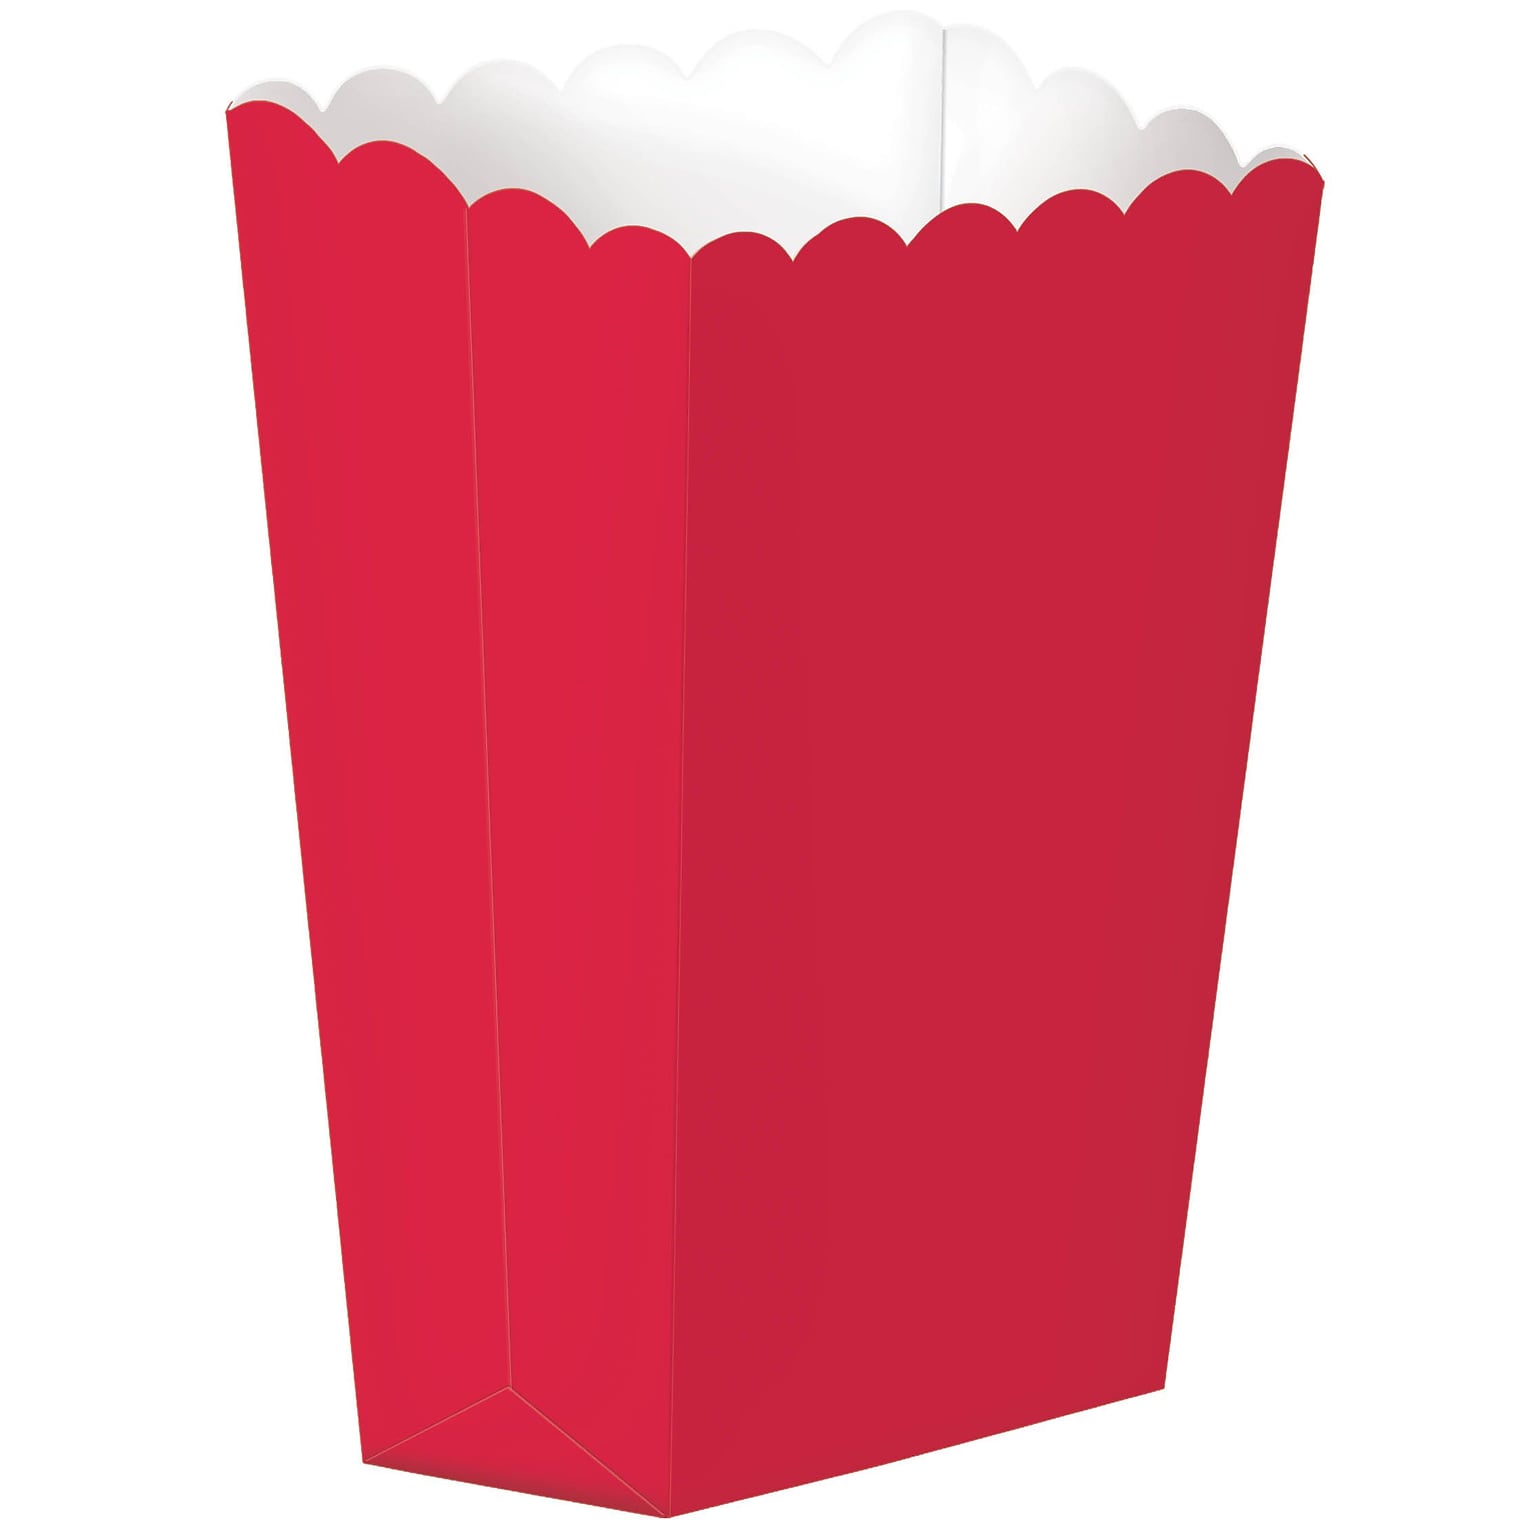 Amscan Paper Popcorn Boxes; 5.25H x 2.5W, Red, 12/Pack, 5 Per Pack (370221.4)